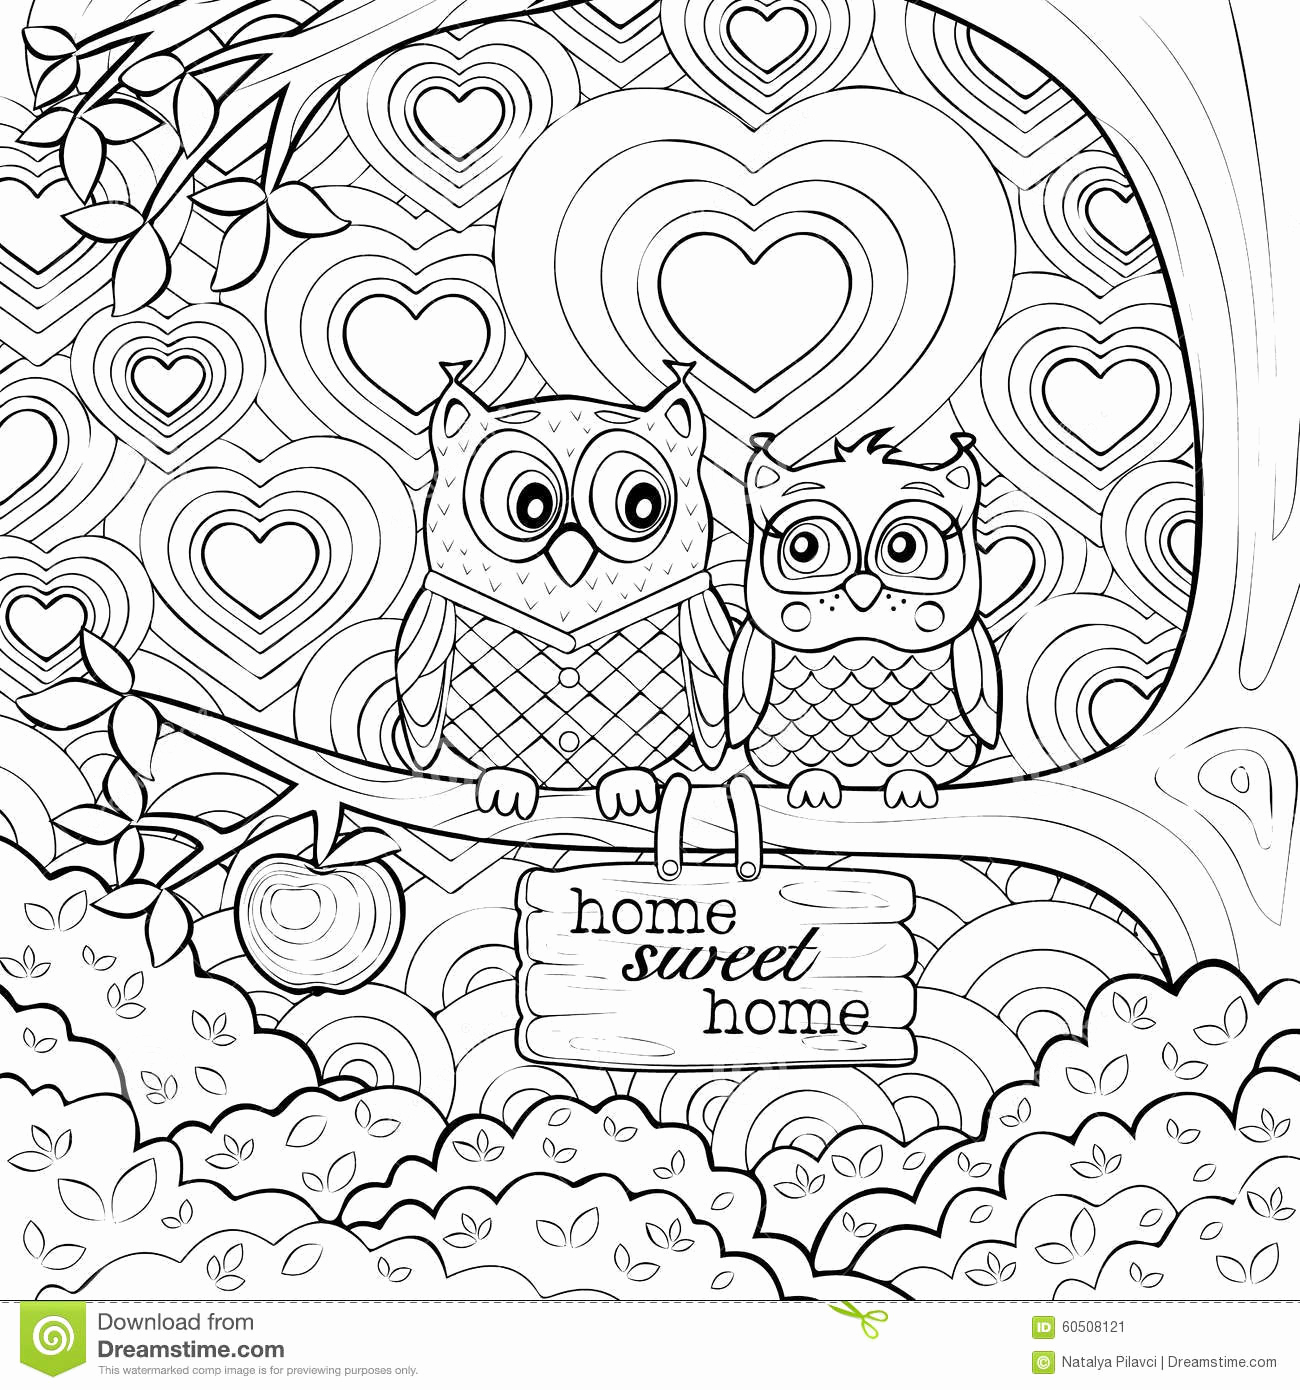 Coloring Pages : Beanie Boo Coloring Pages That You Can Print Free - Free Printable South Park Coloring Pages